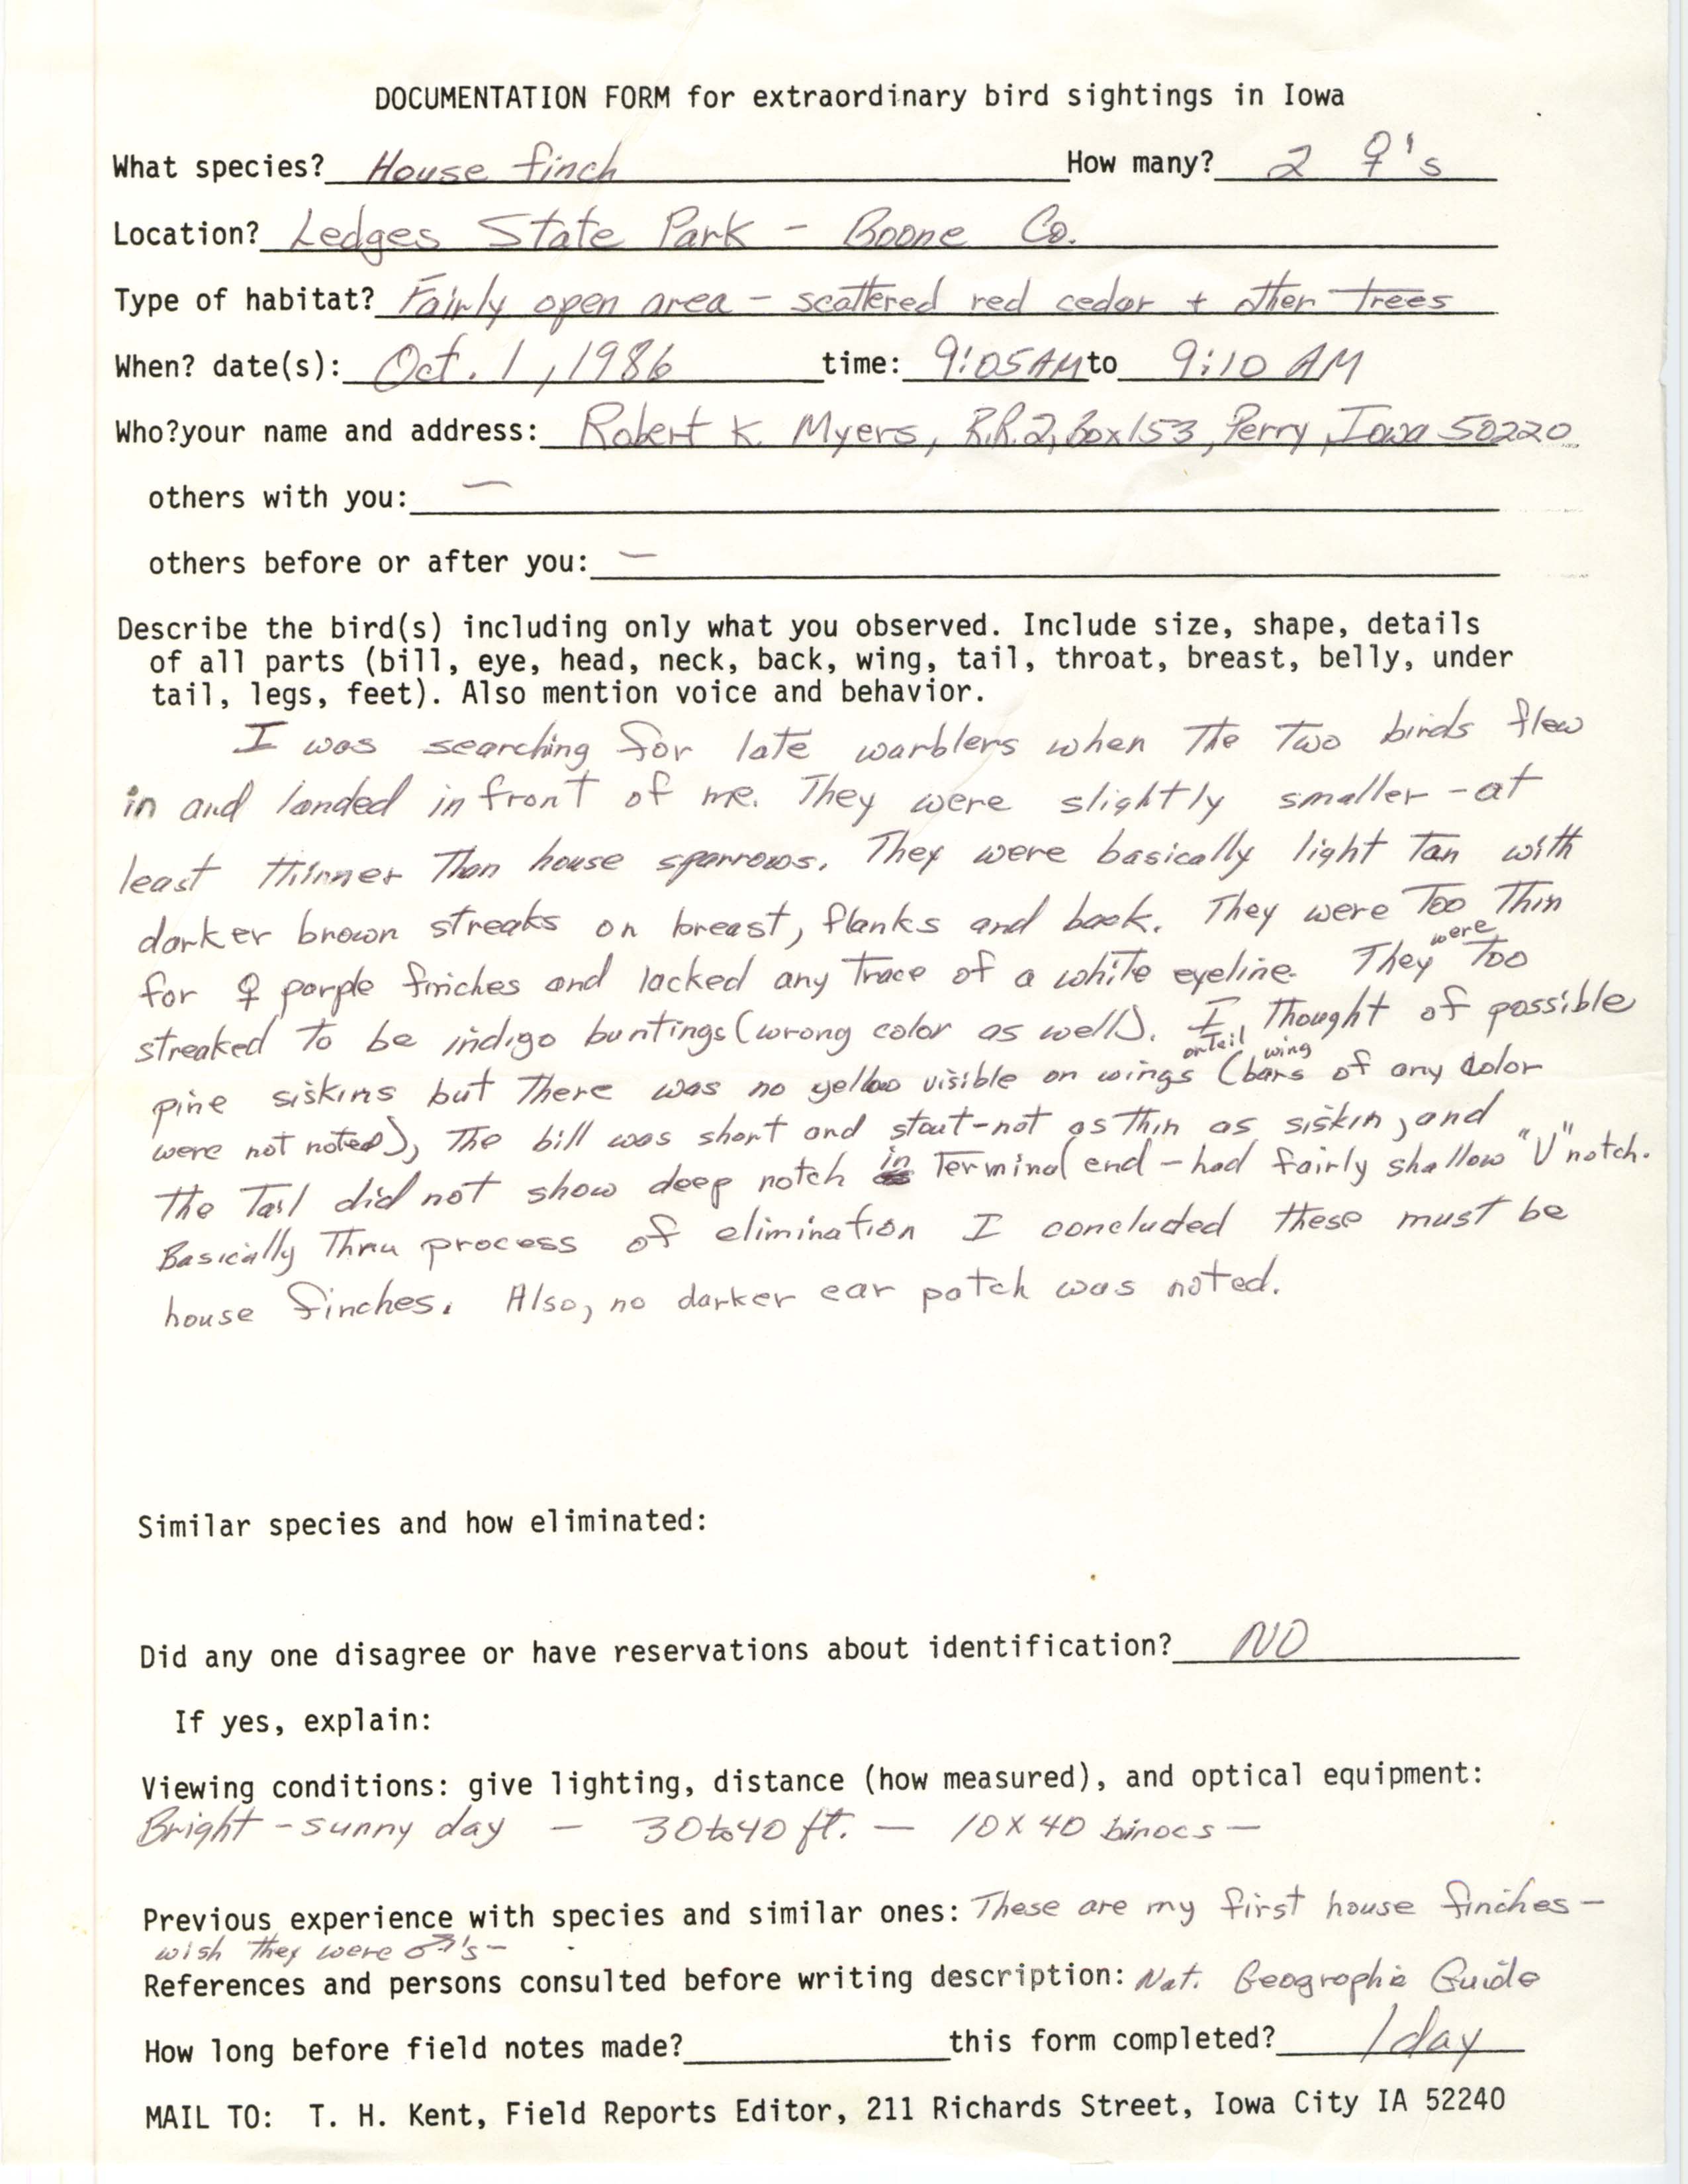 Rare bird documentation form for House Finch at Ledges State Park, 1986